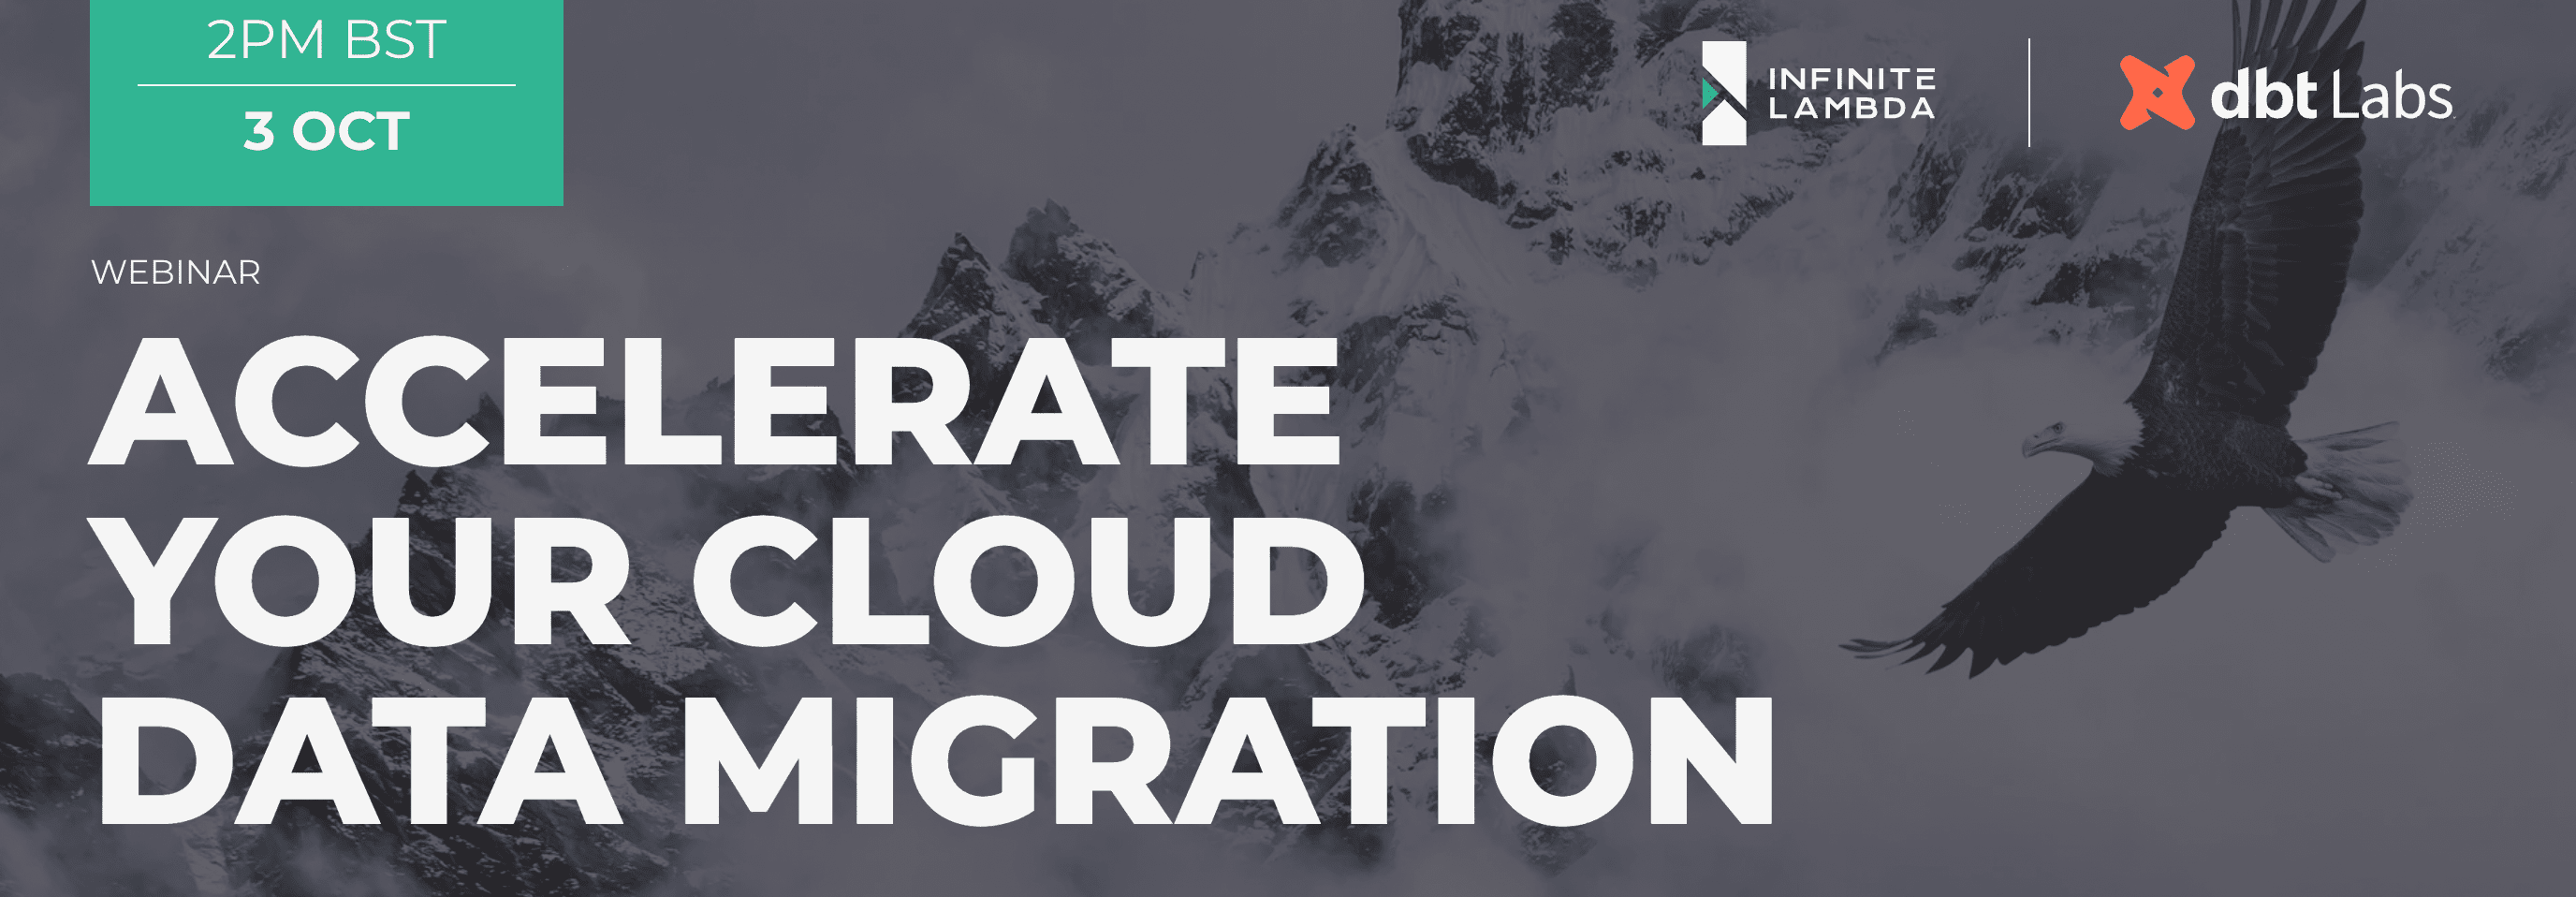 Accelerate your Cloud Data Migration with Infinite Lambda and dbt Labs 